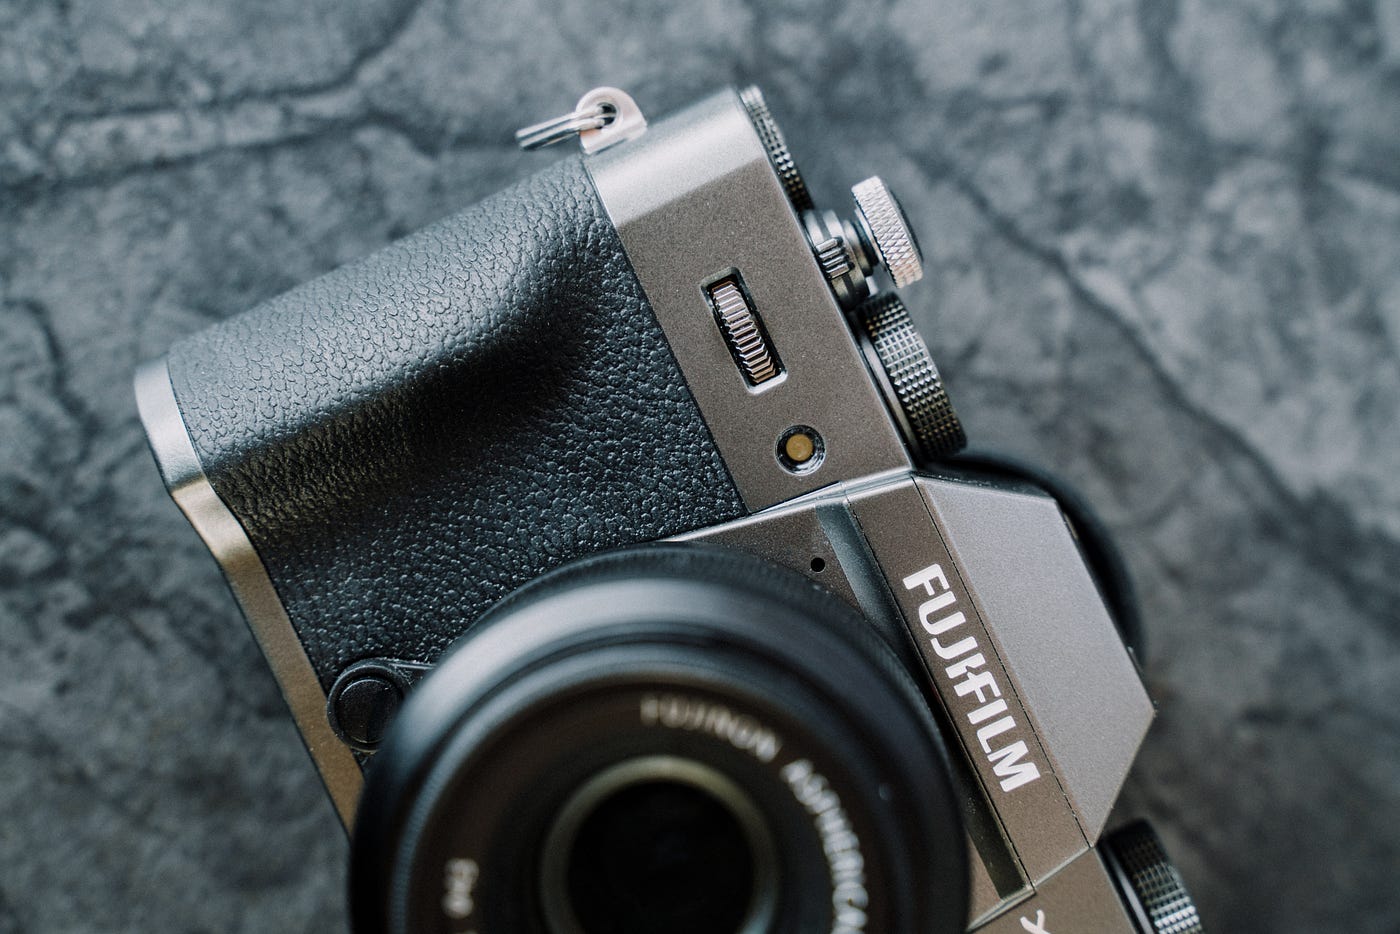 Fujifilm XT30 After 6 Months Of Use 